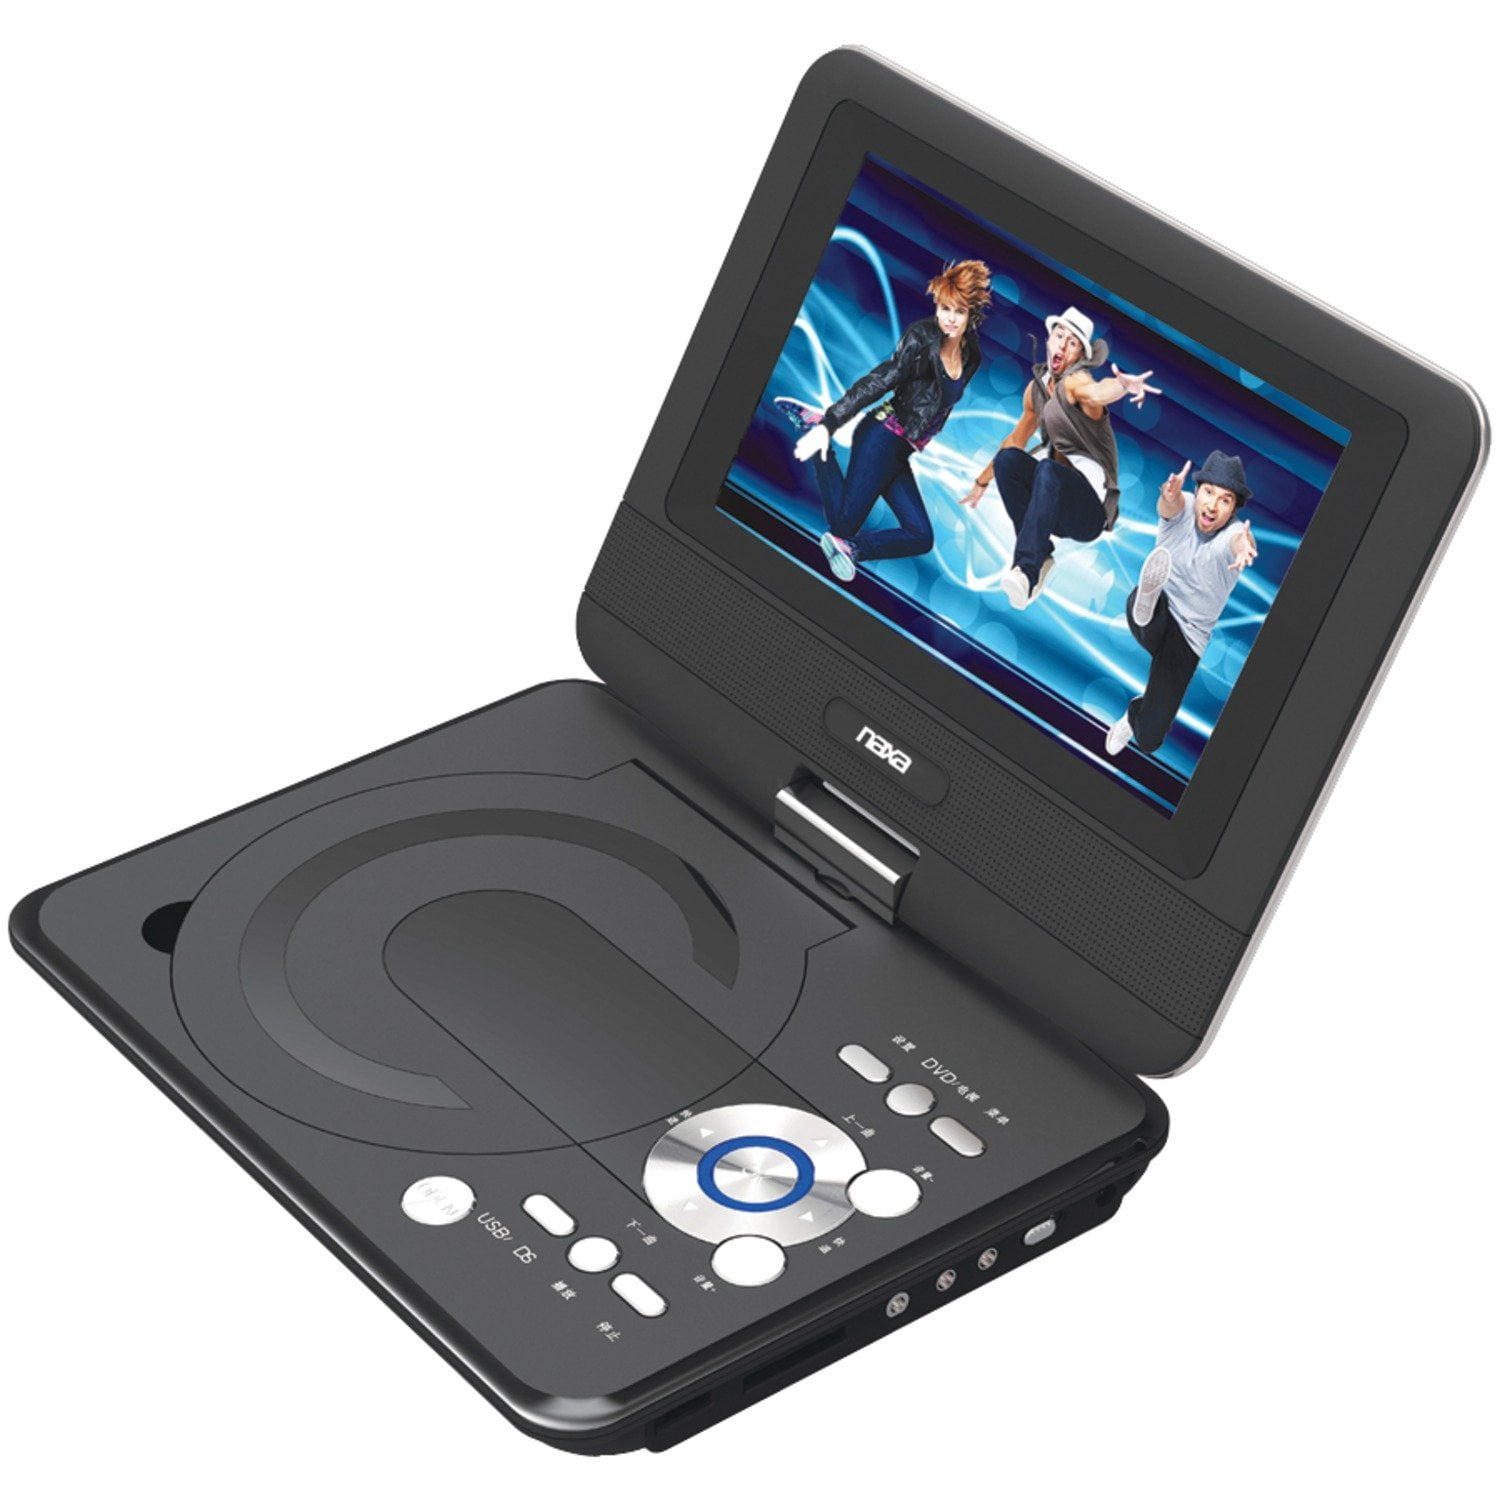 Like New Venturer portable DVD player Comes with An extra battery , so  there is two rechargeable batteries. Remote, Charger , Audio video cords,  Ca for Sale in Ormond Beach, FL - OfferUp